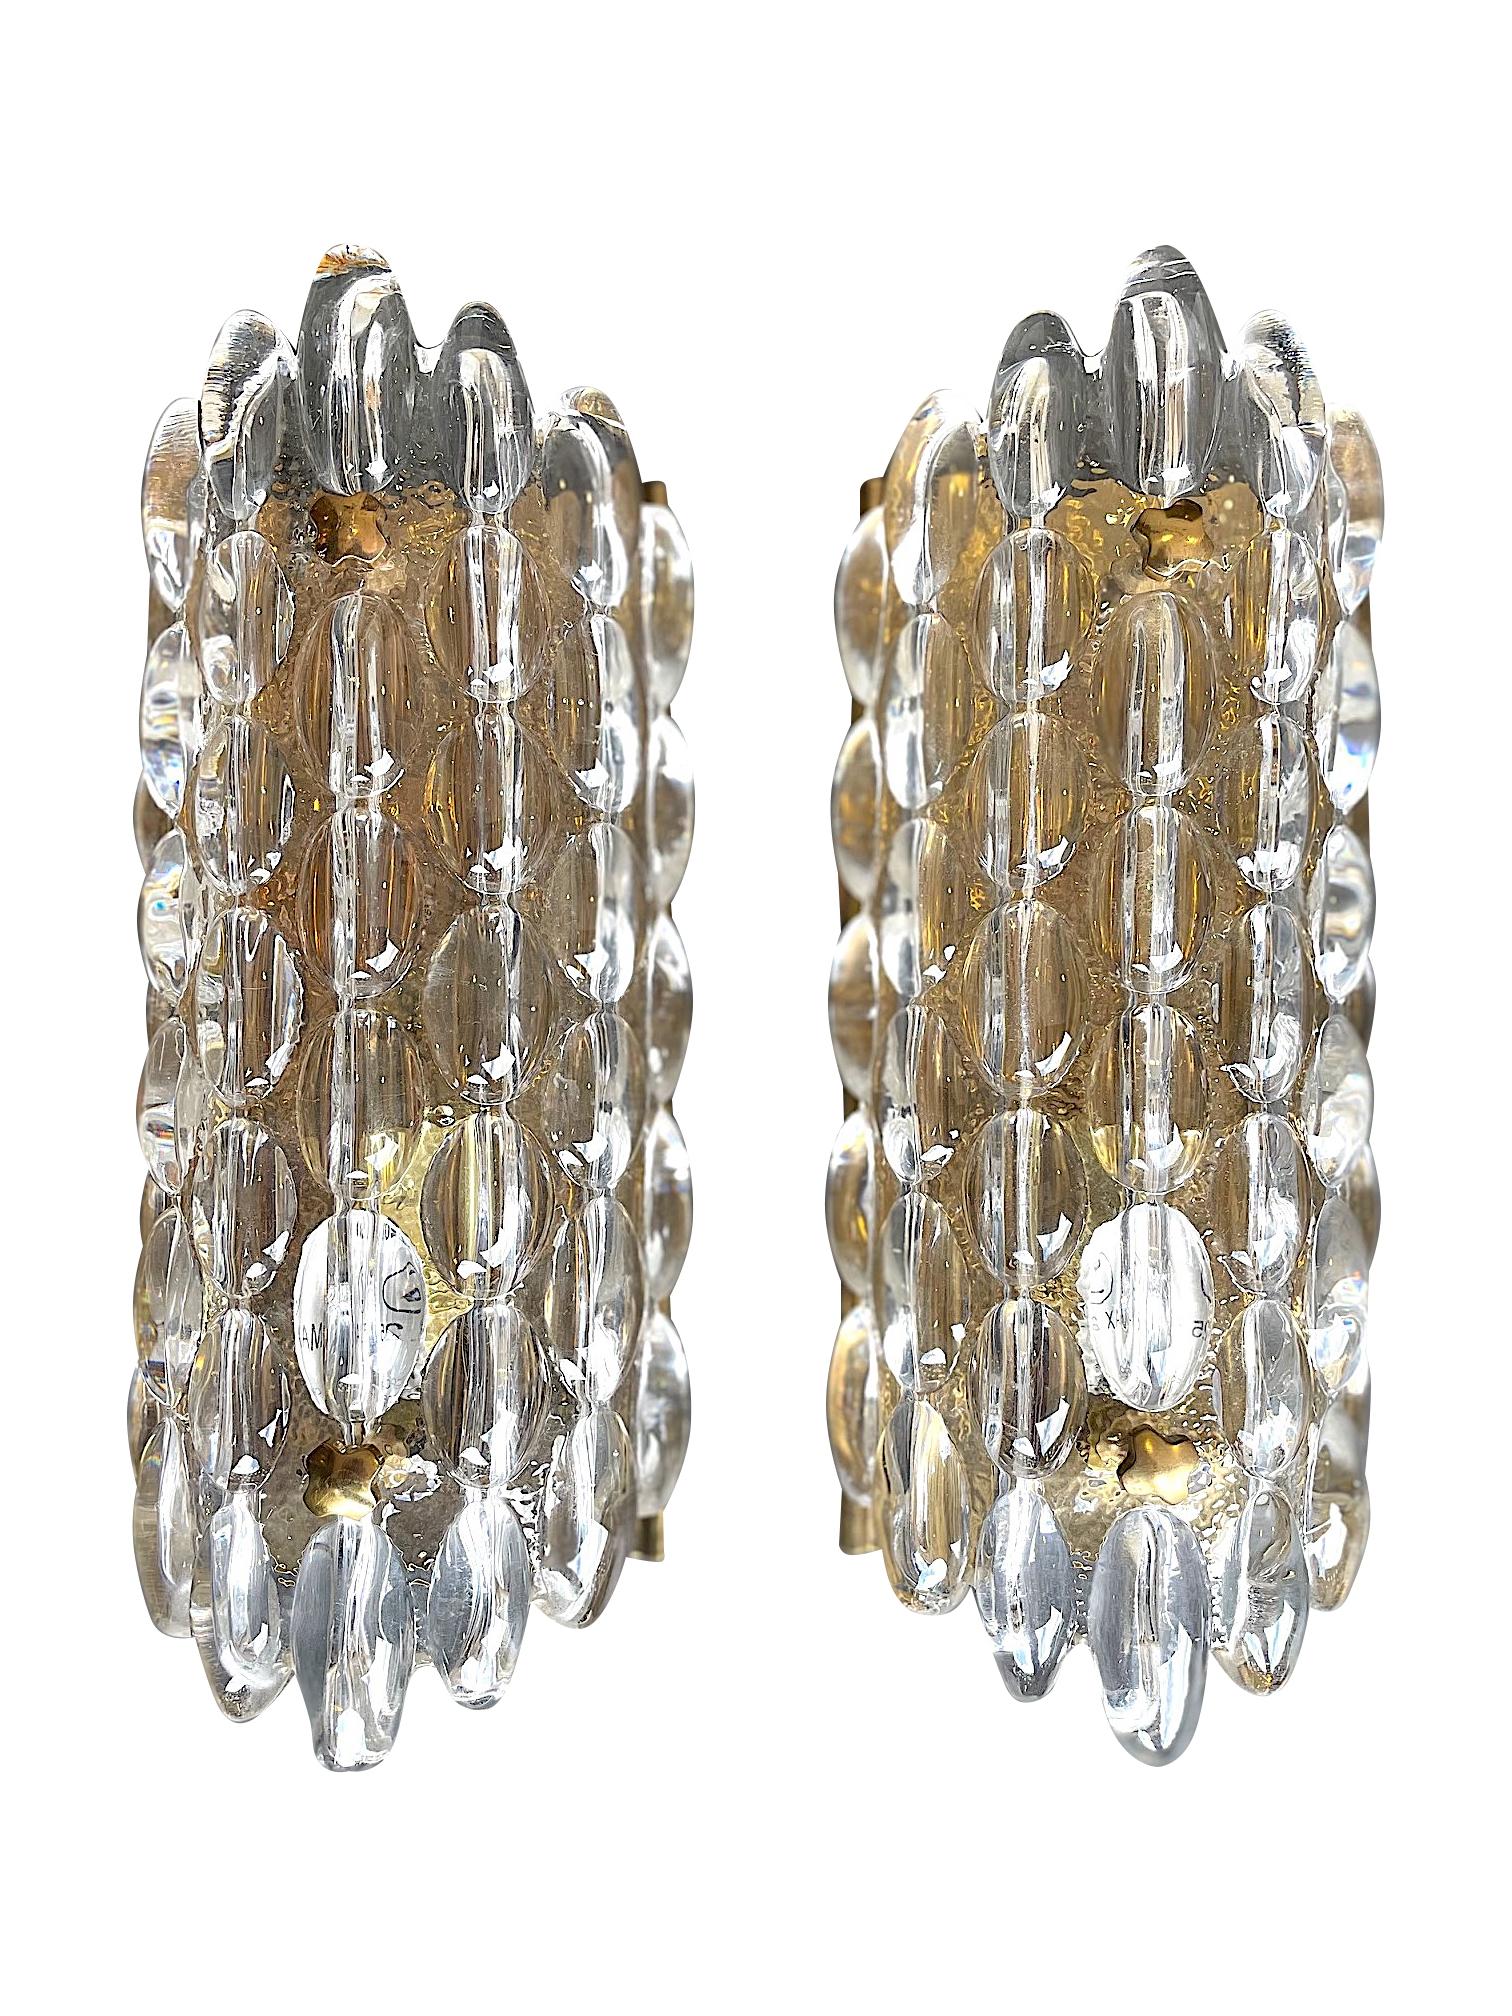 Pair of Swedish Orrefors Glass Wall Sconces by Carl Fagerlund on Brass Plates 2